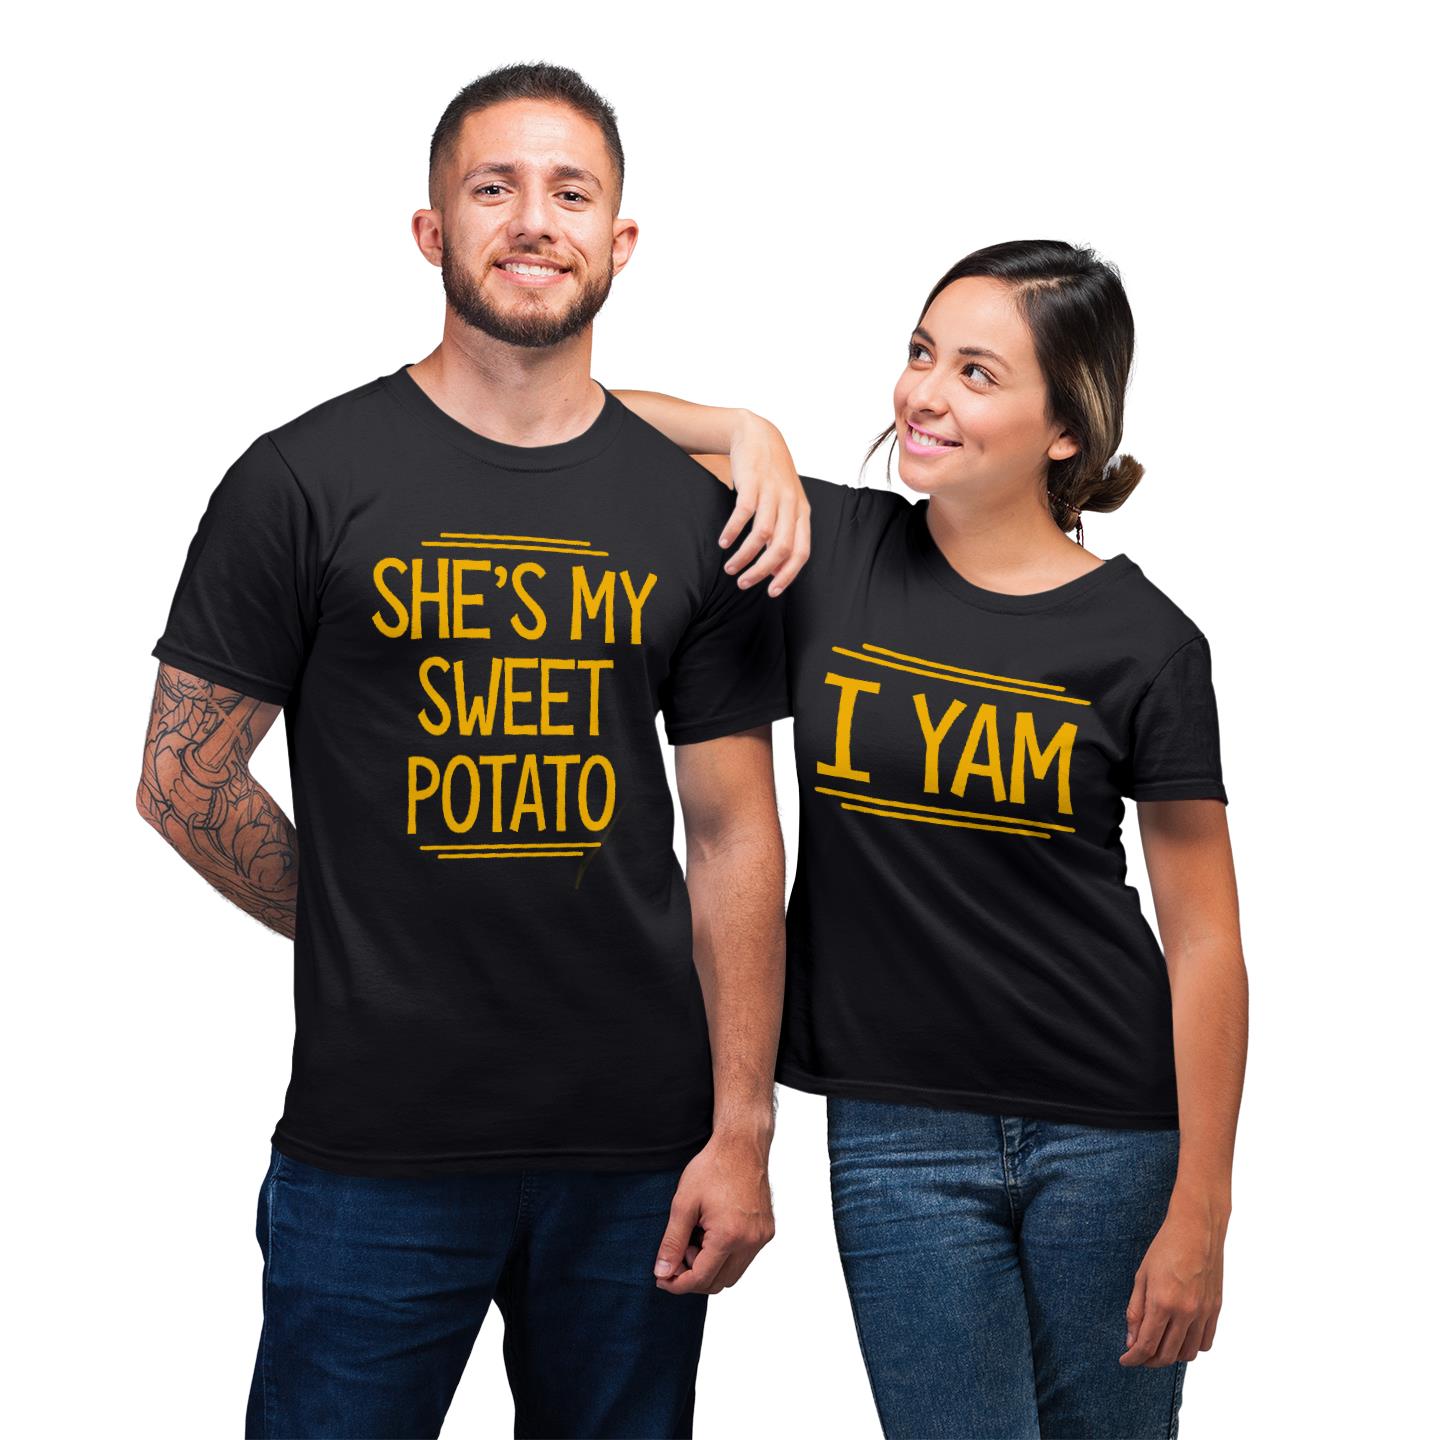 She?s My Sweet Potato I Yam Funny Matching For Couple His Her Gift T-Shirt